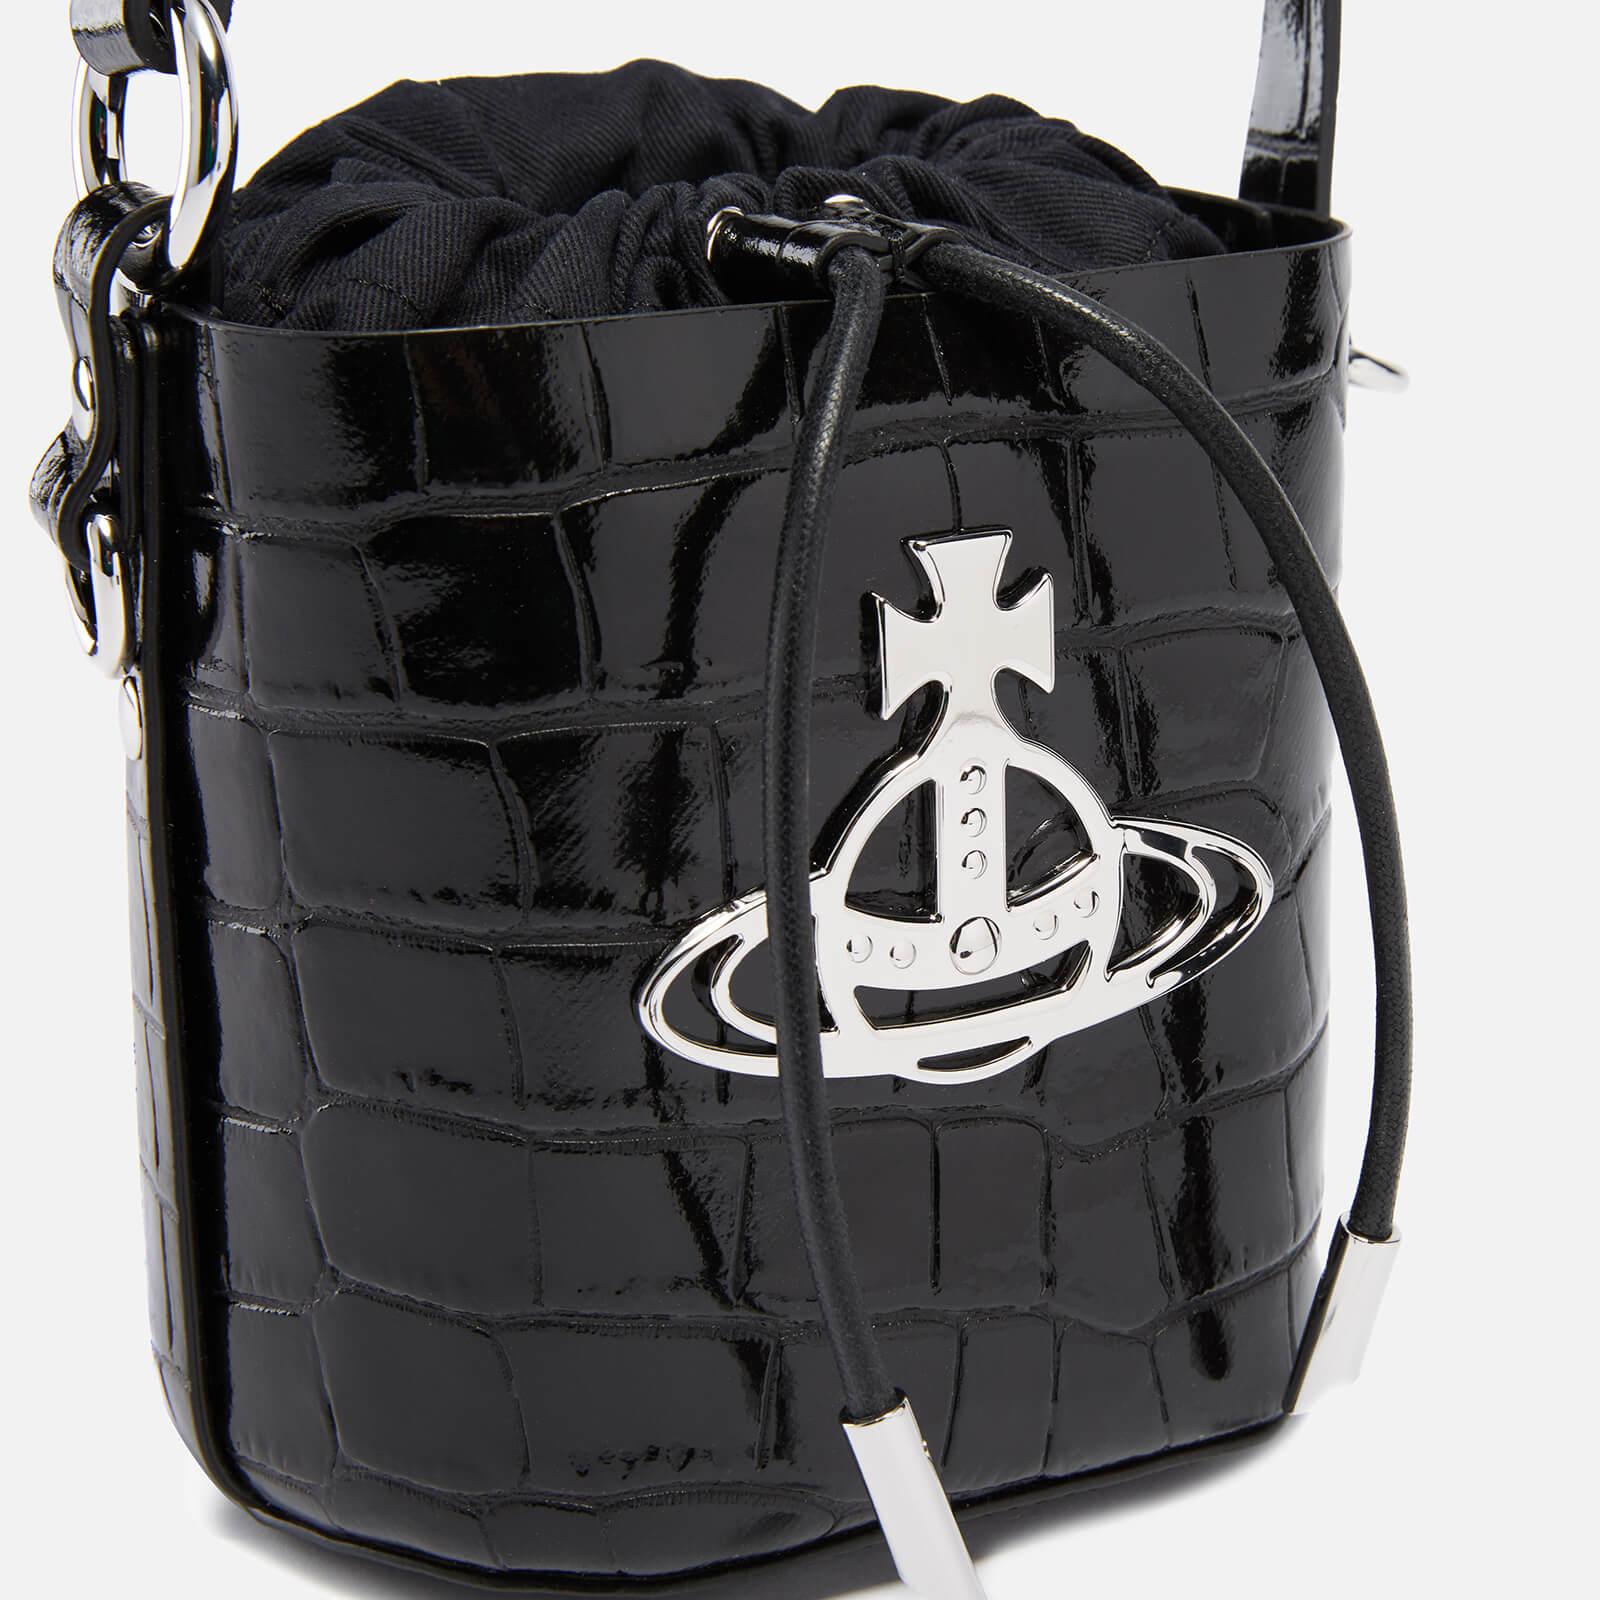 Daisy Small Leather Bucket Bag in Black - Vivienne Westwood